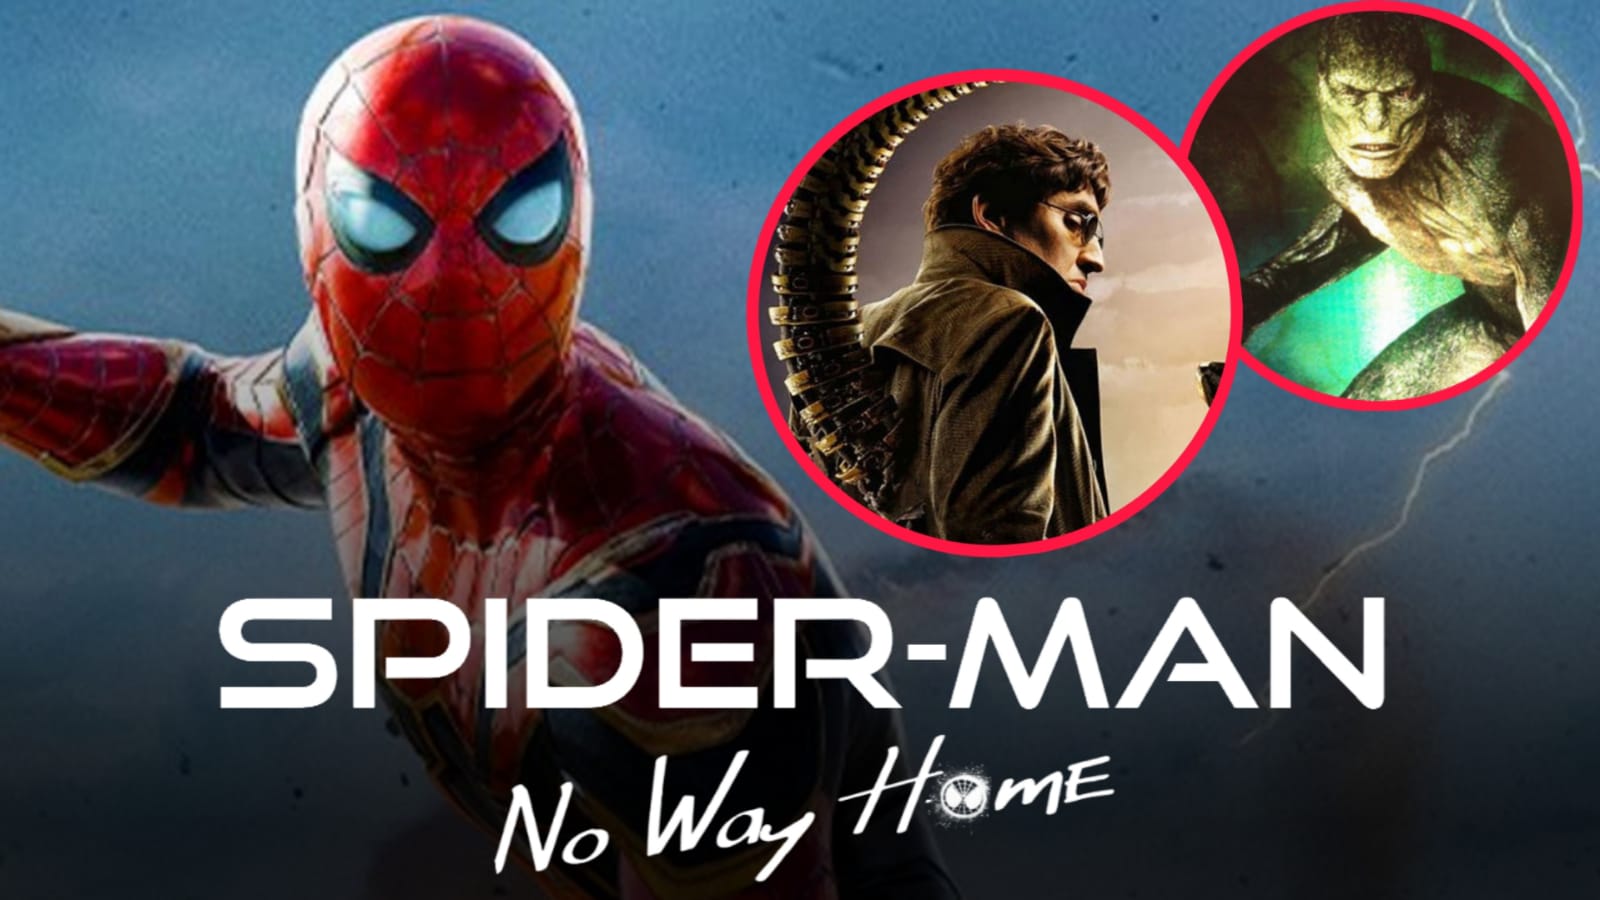 New ‘Spider-Man: No Way Home’ TV Spots Offer New Looks at Doc Ock and Lizard